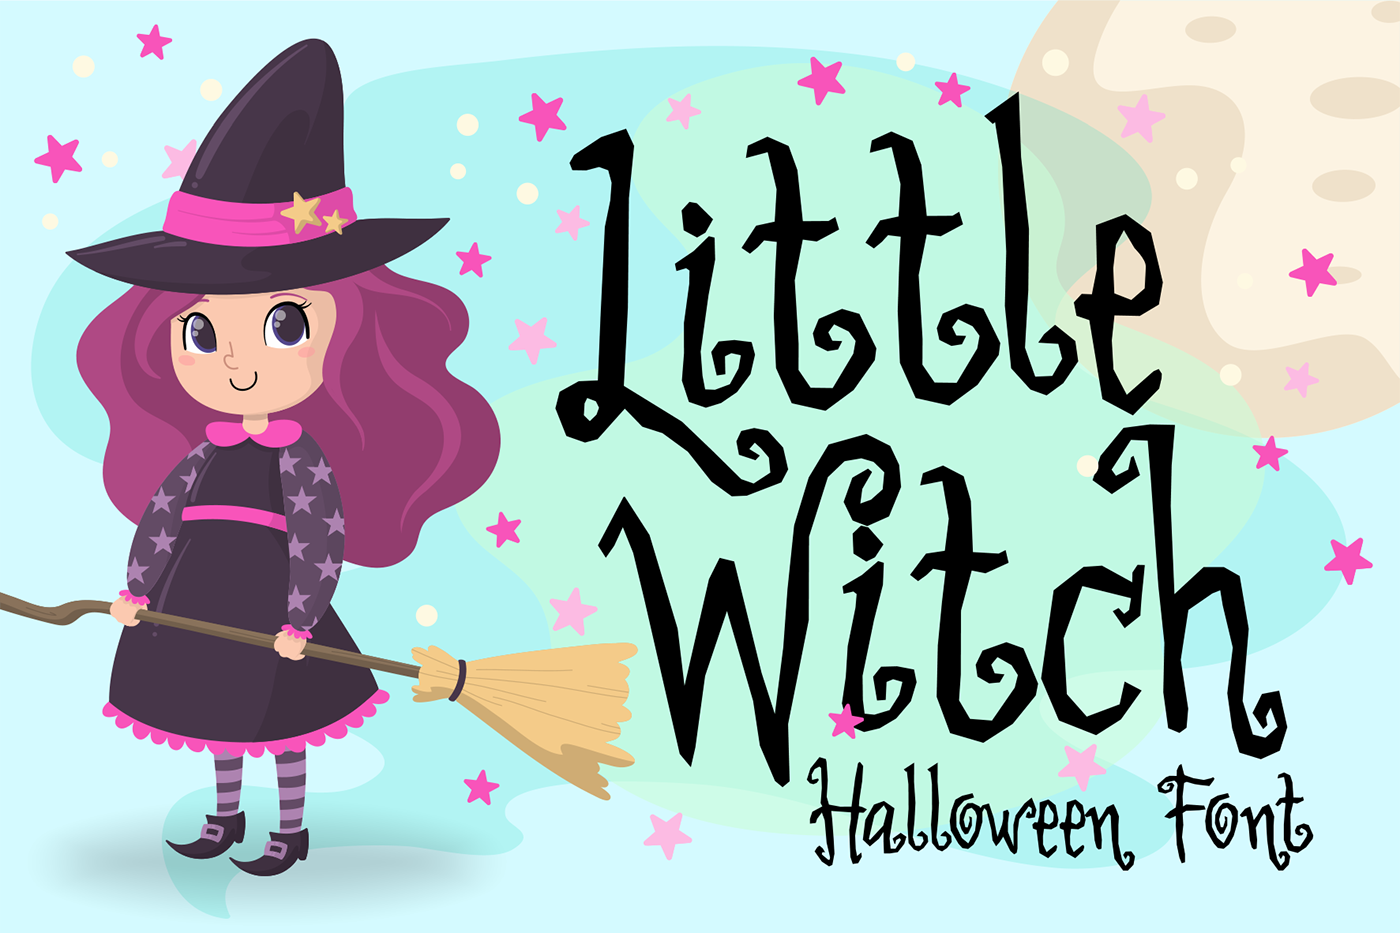 Download Free Little Witch Font Brithos Type Fontspace PSD Mockup Template